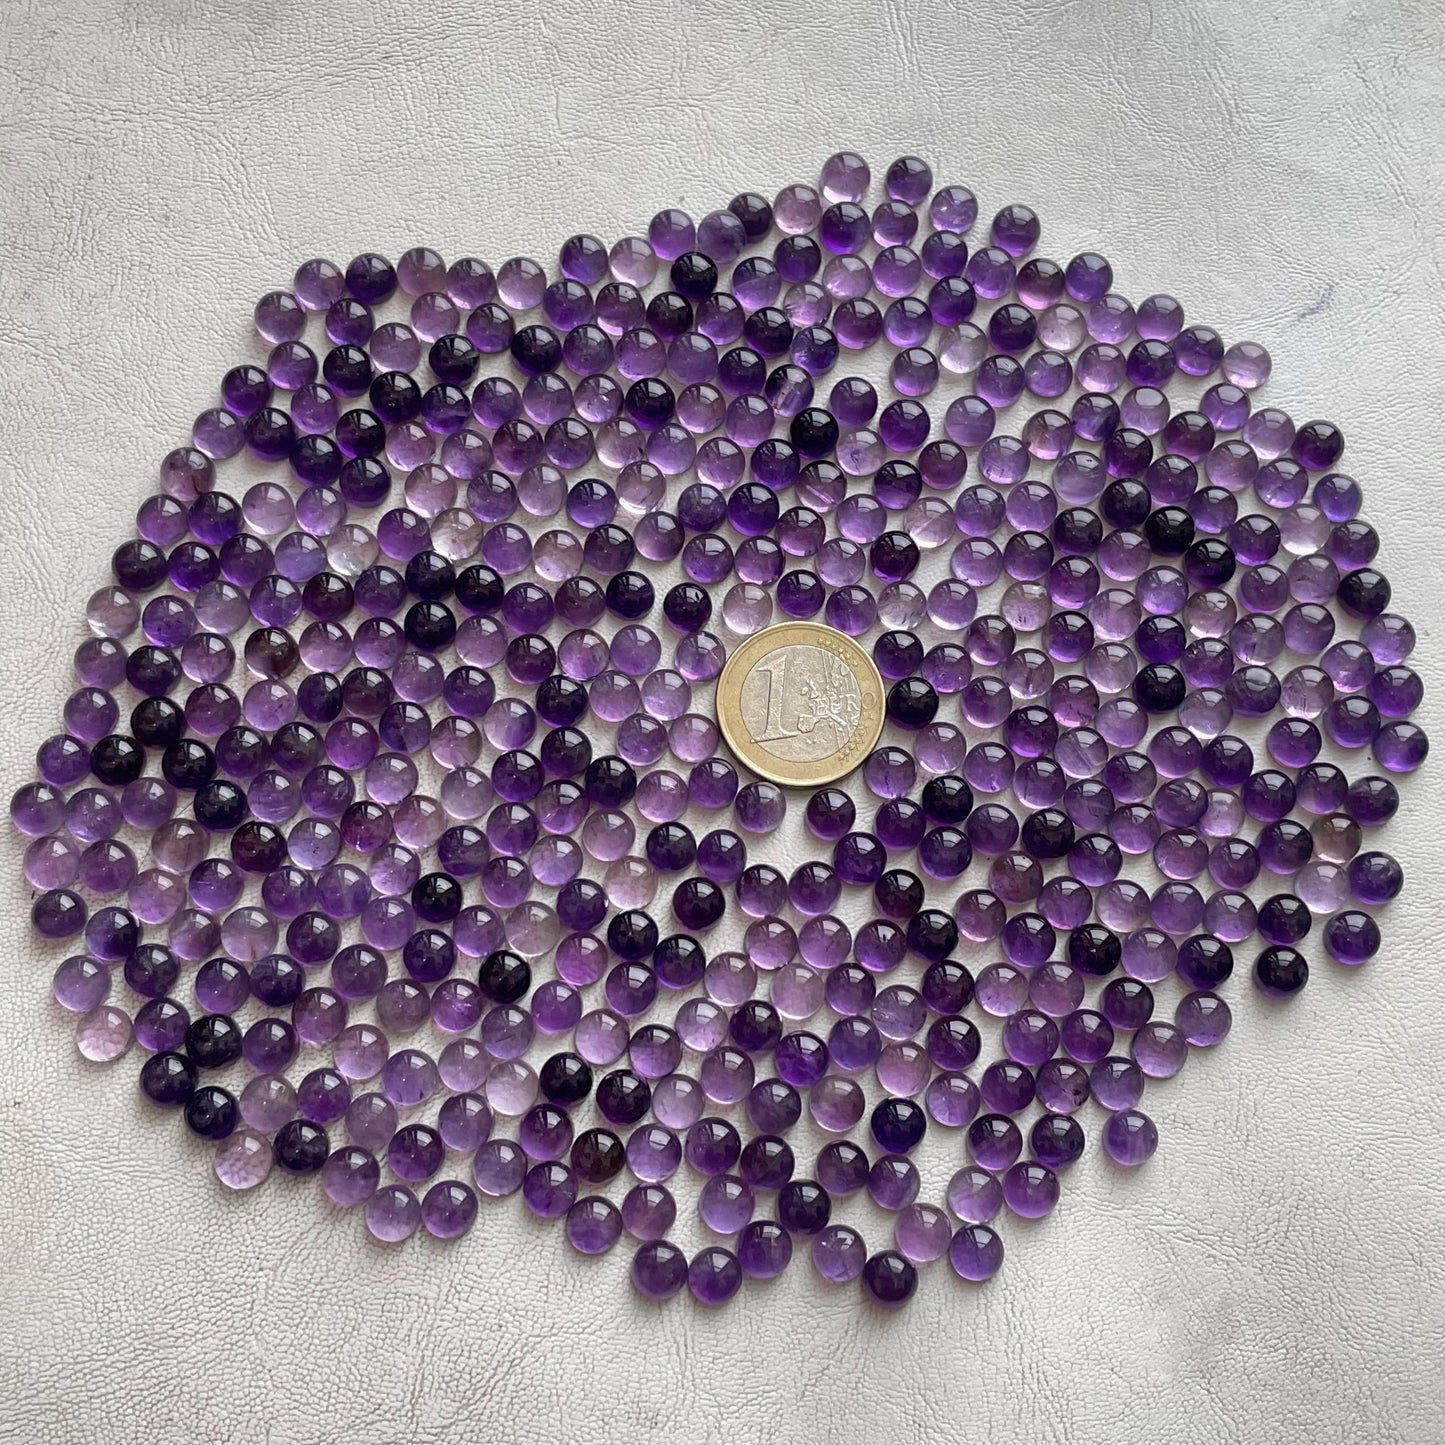 Natural Purple Amethyst 7 mm Round Cabochon